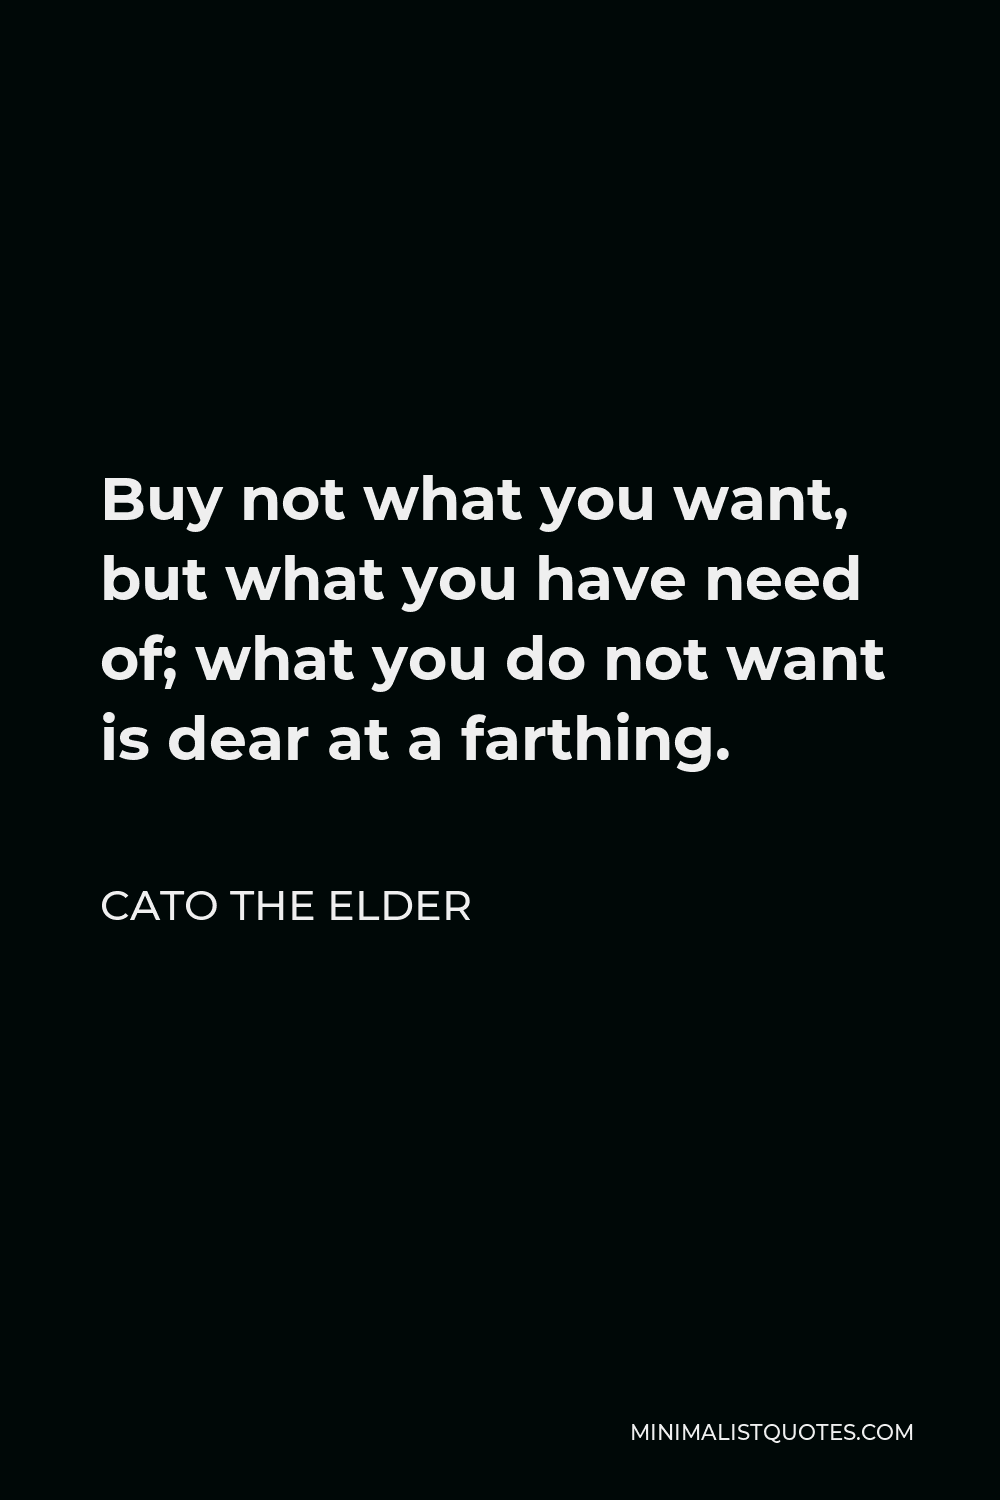 Cato the Elder Quote - Buy not what you want, but what you have need of; what you do not want is dear at a farthing.